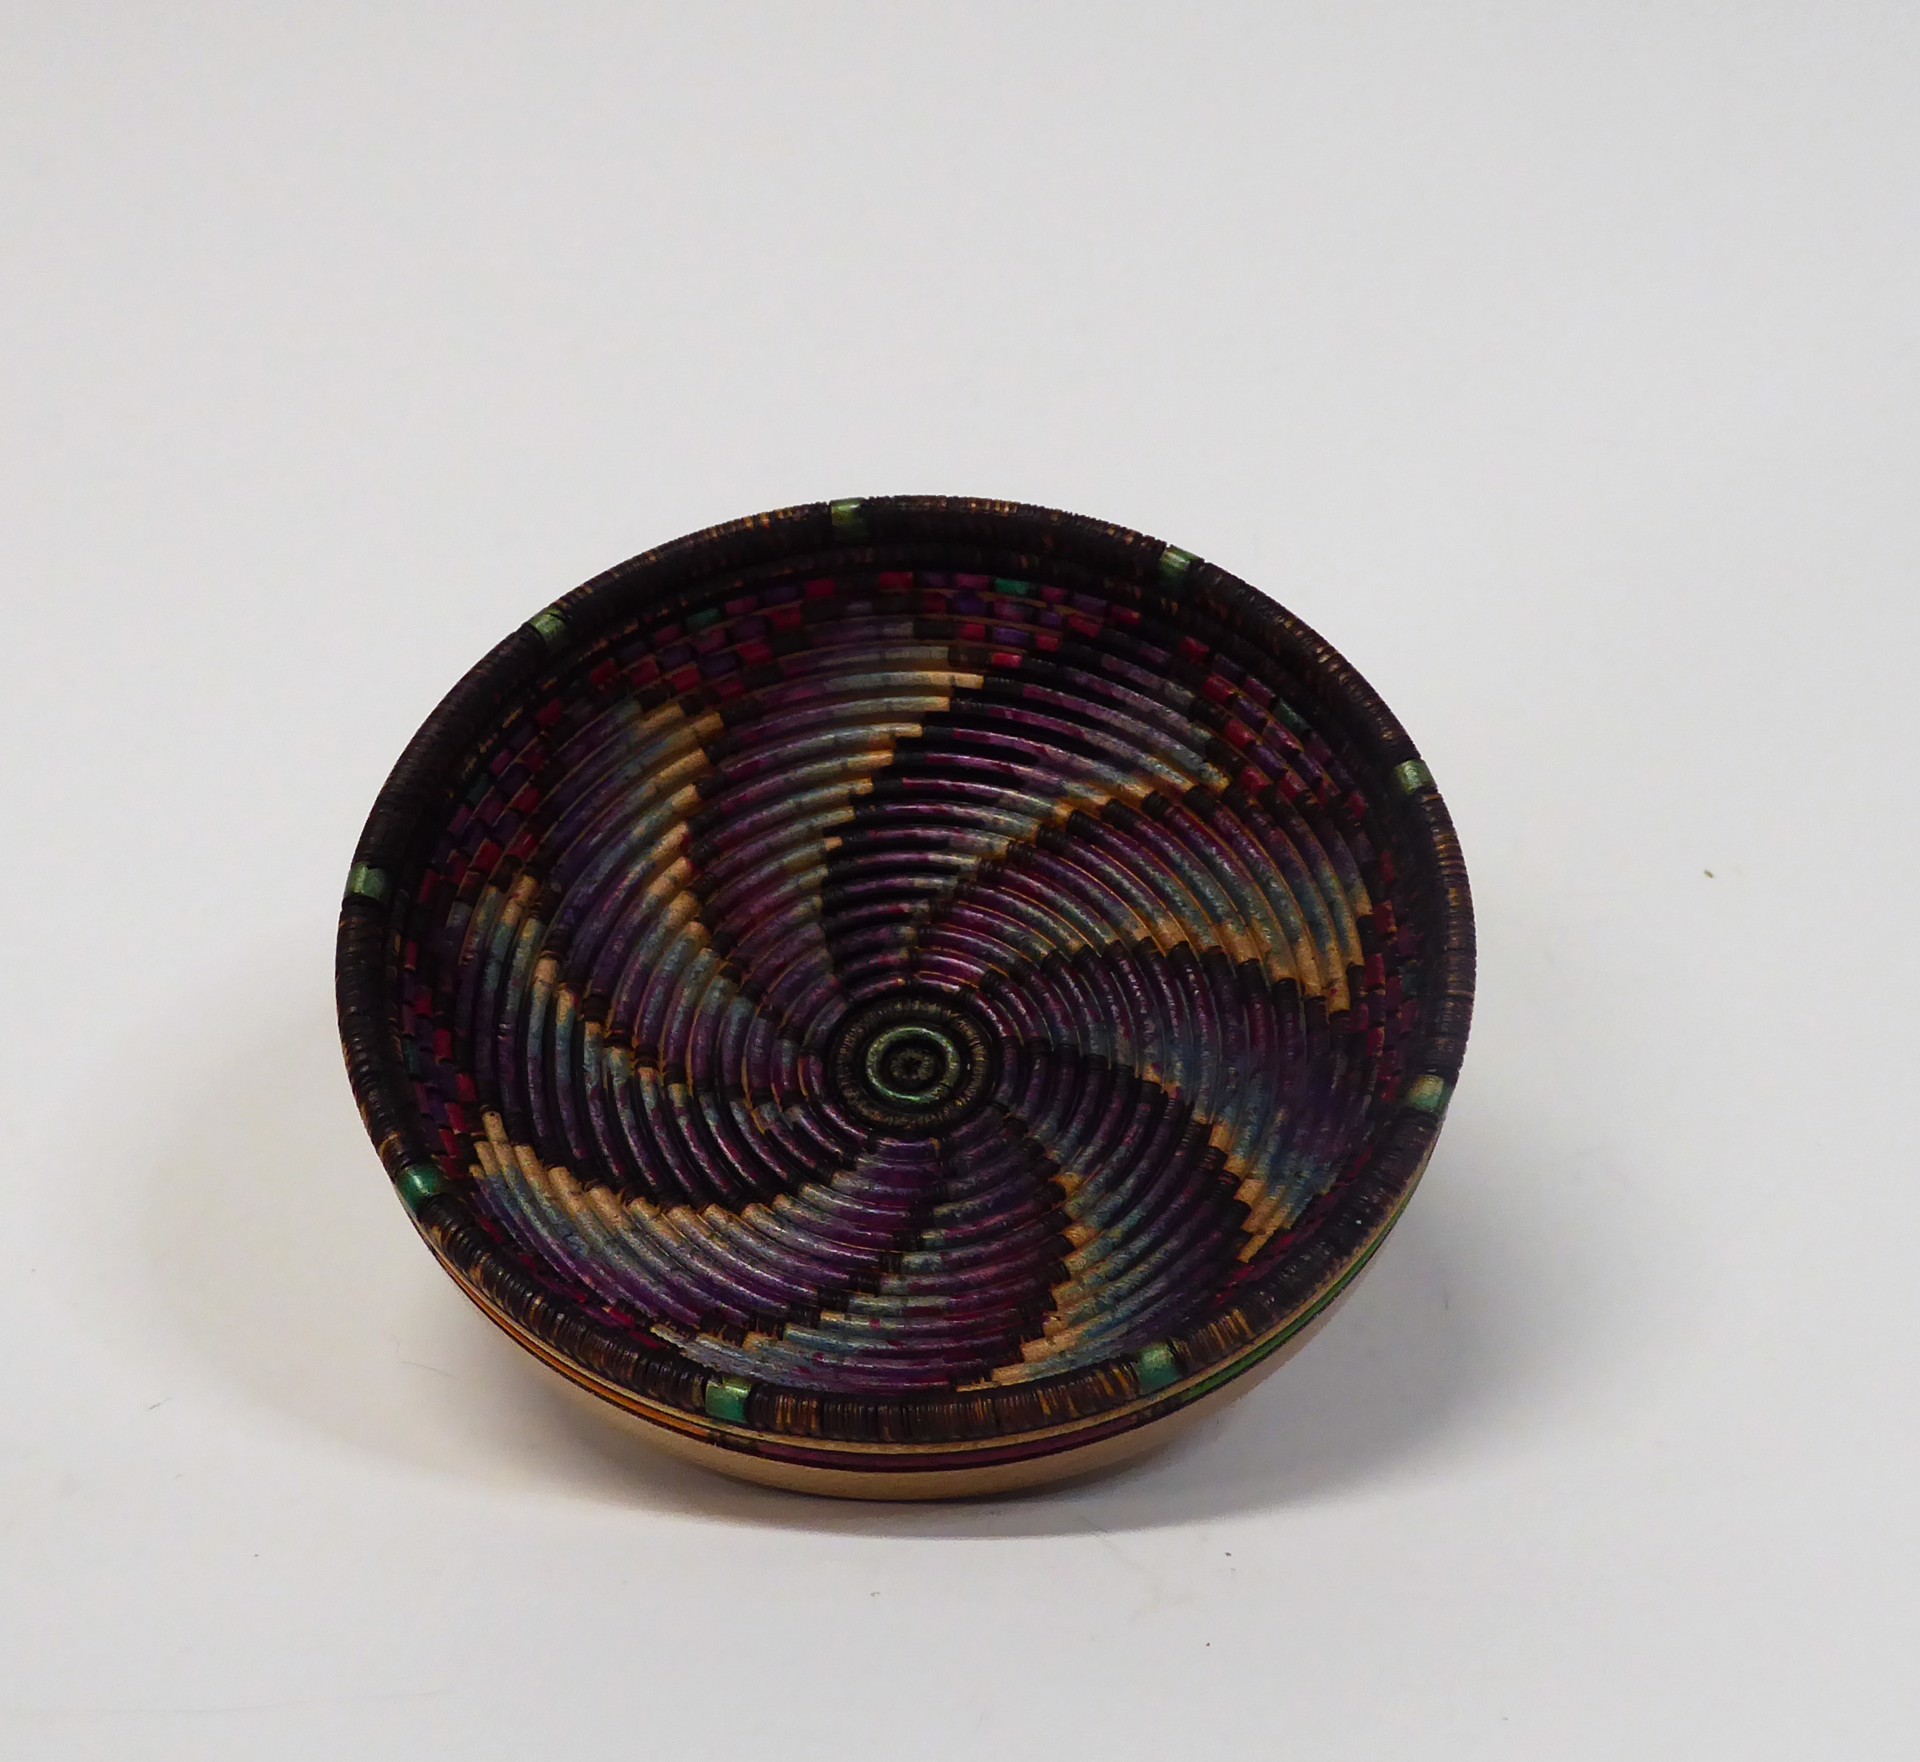 Multi Colored Bowl with Metallic Accents by Keoni